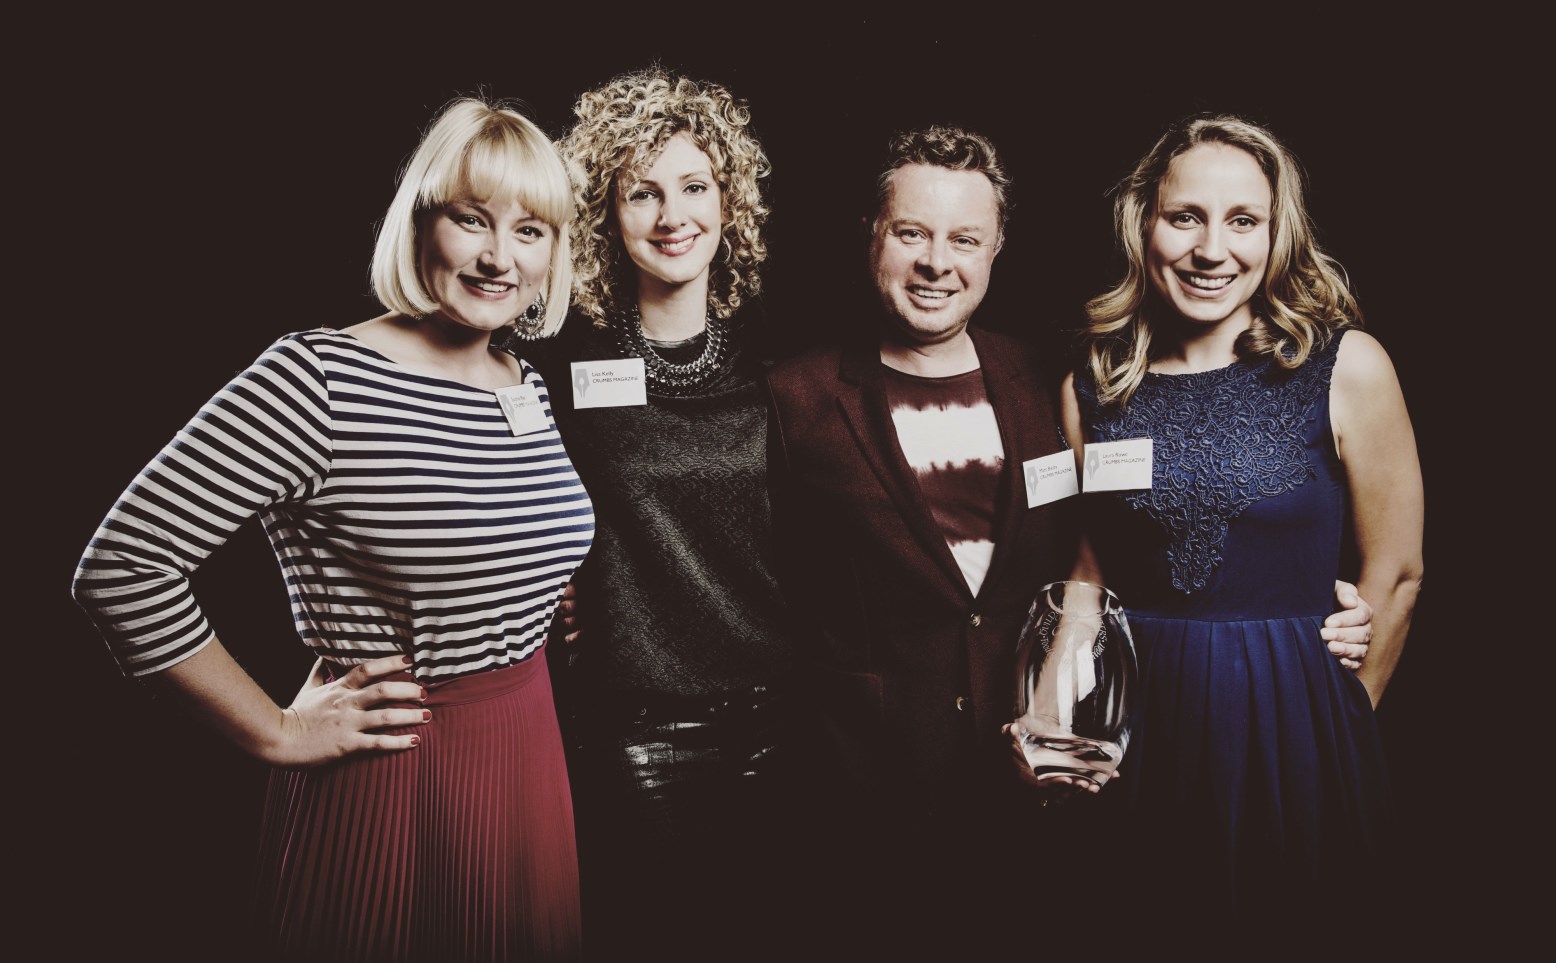 From left to right: Sophie Rae, Lisa Kelly, Matt Bielby and Laura Rowe from Crumbs magazine (winner of the Food Magazine or Section of the Year Award (Sponsored by Tenderstem®))